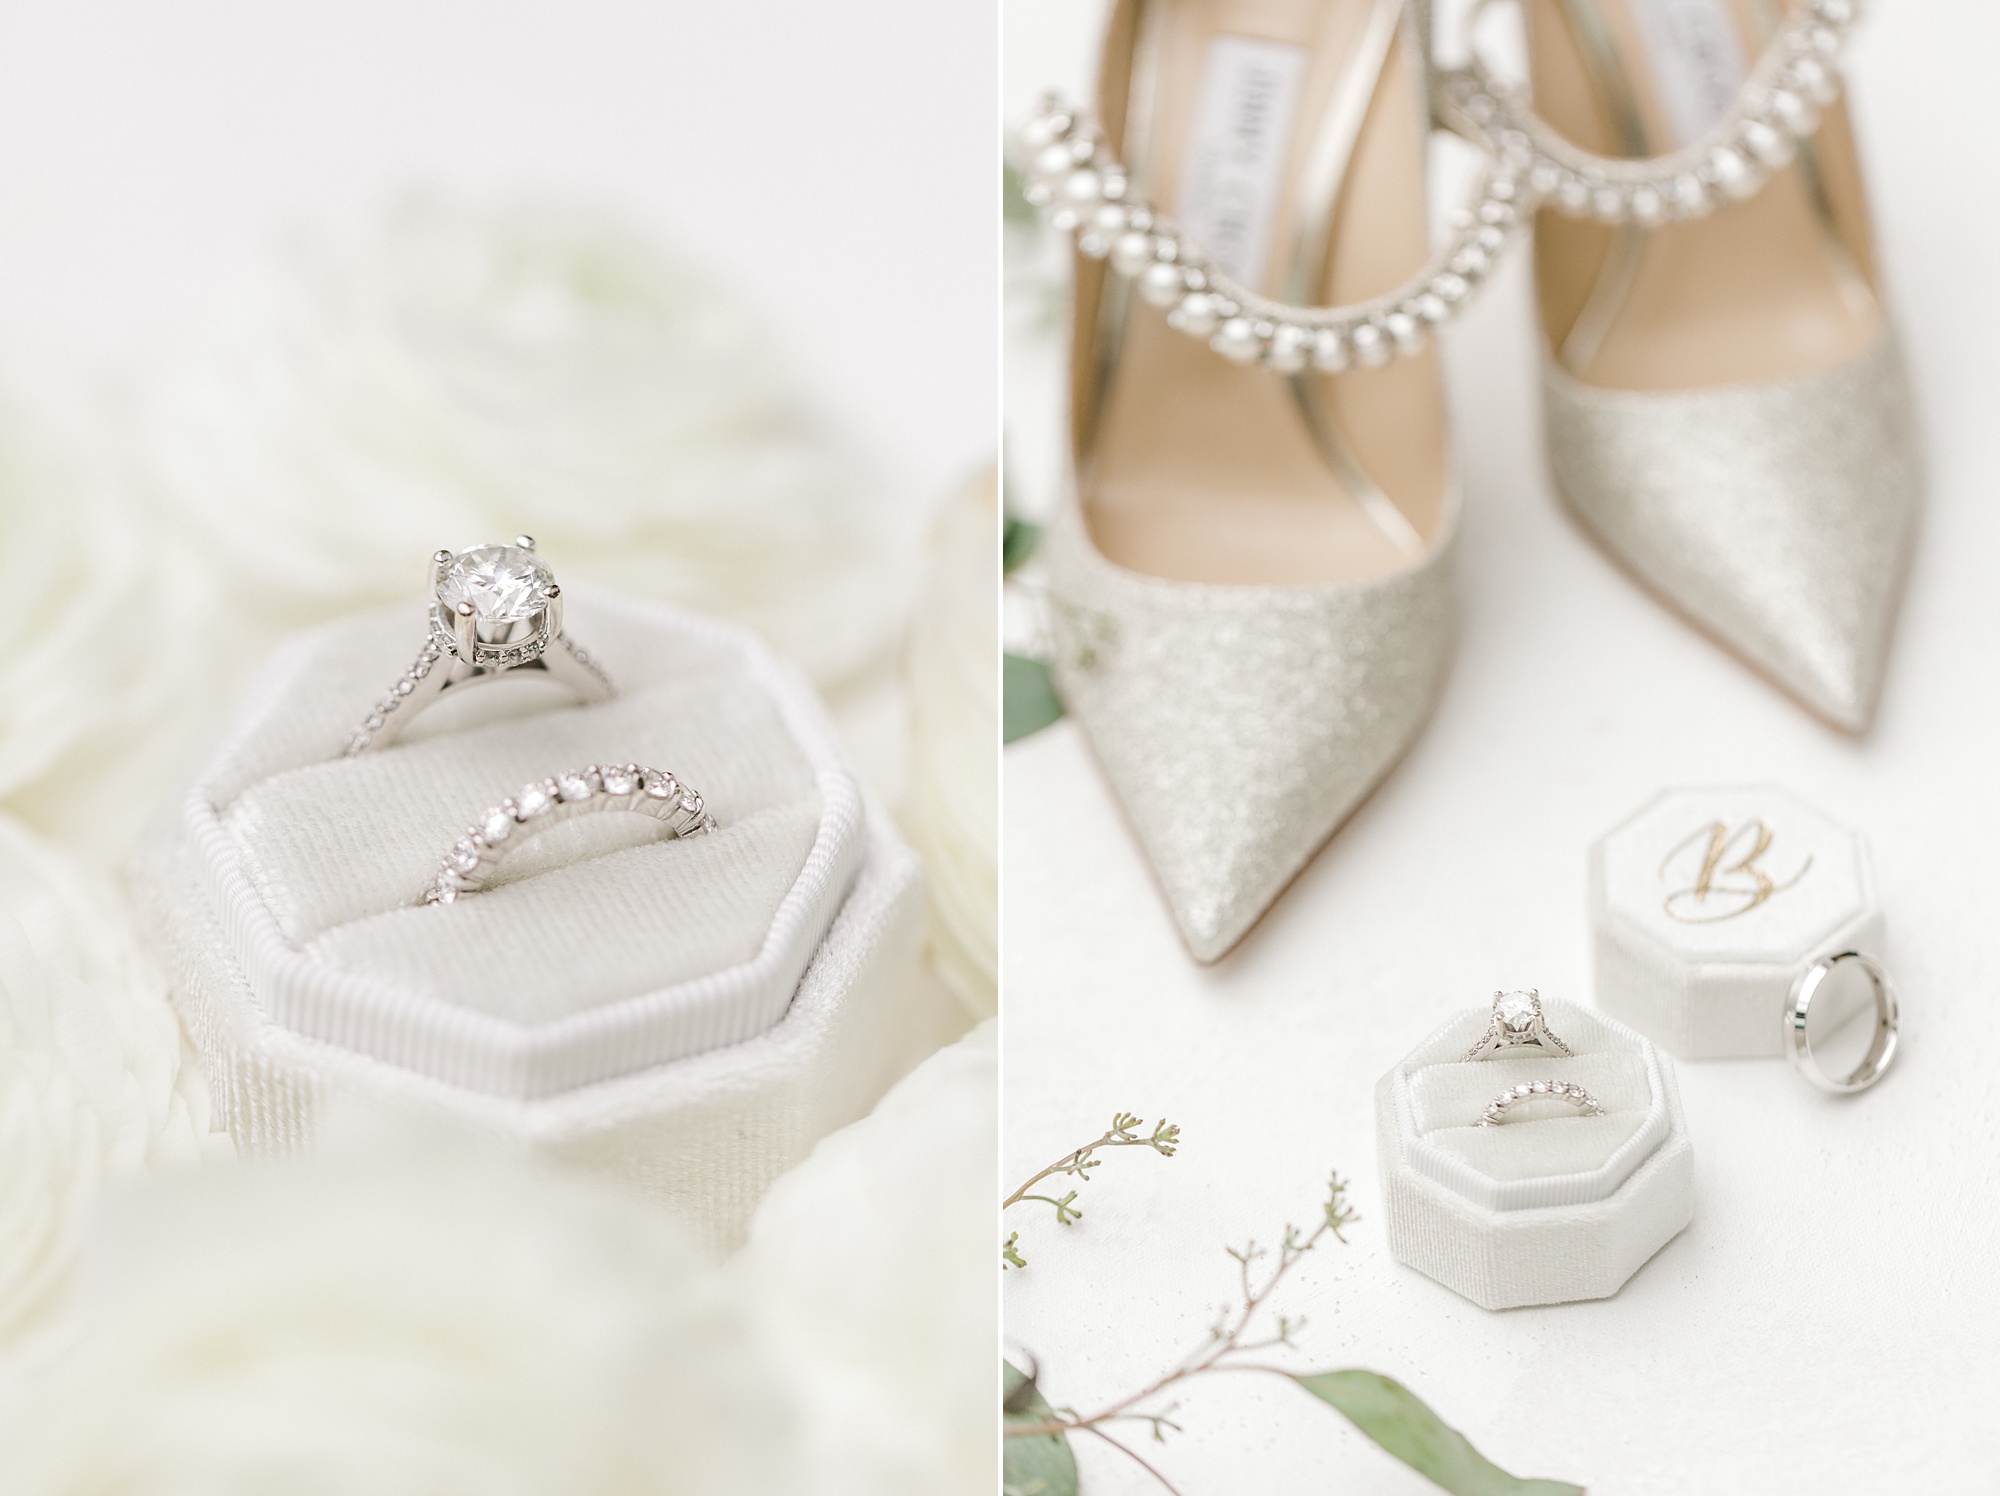 bride's diamond ring in ivory box with shoes for NJ wedding